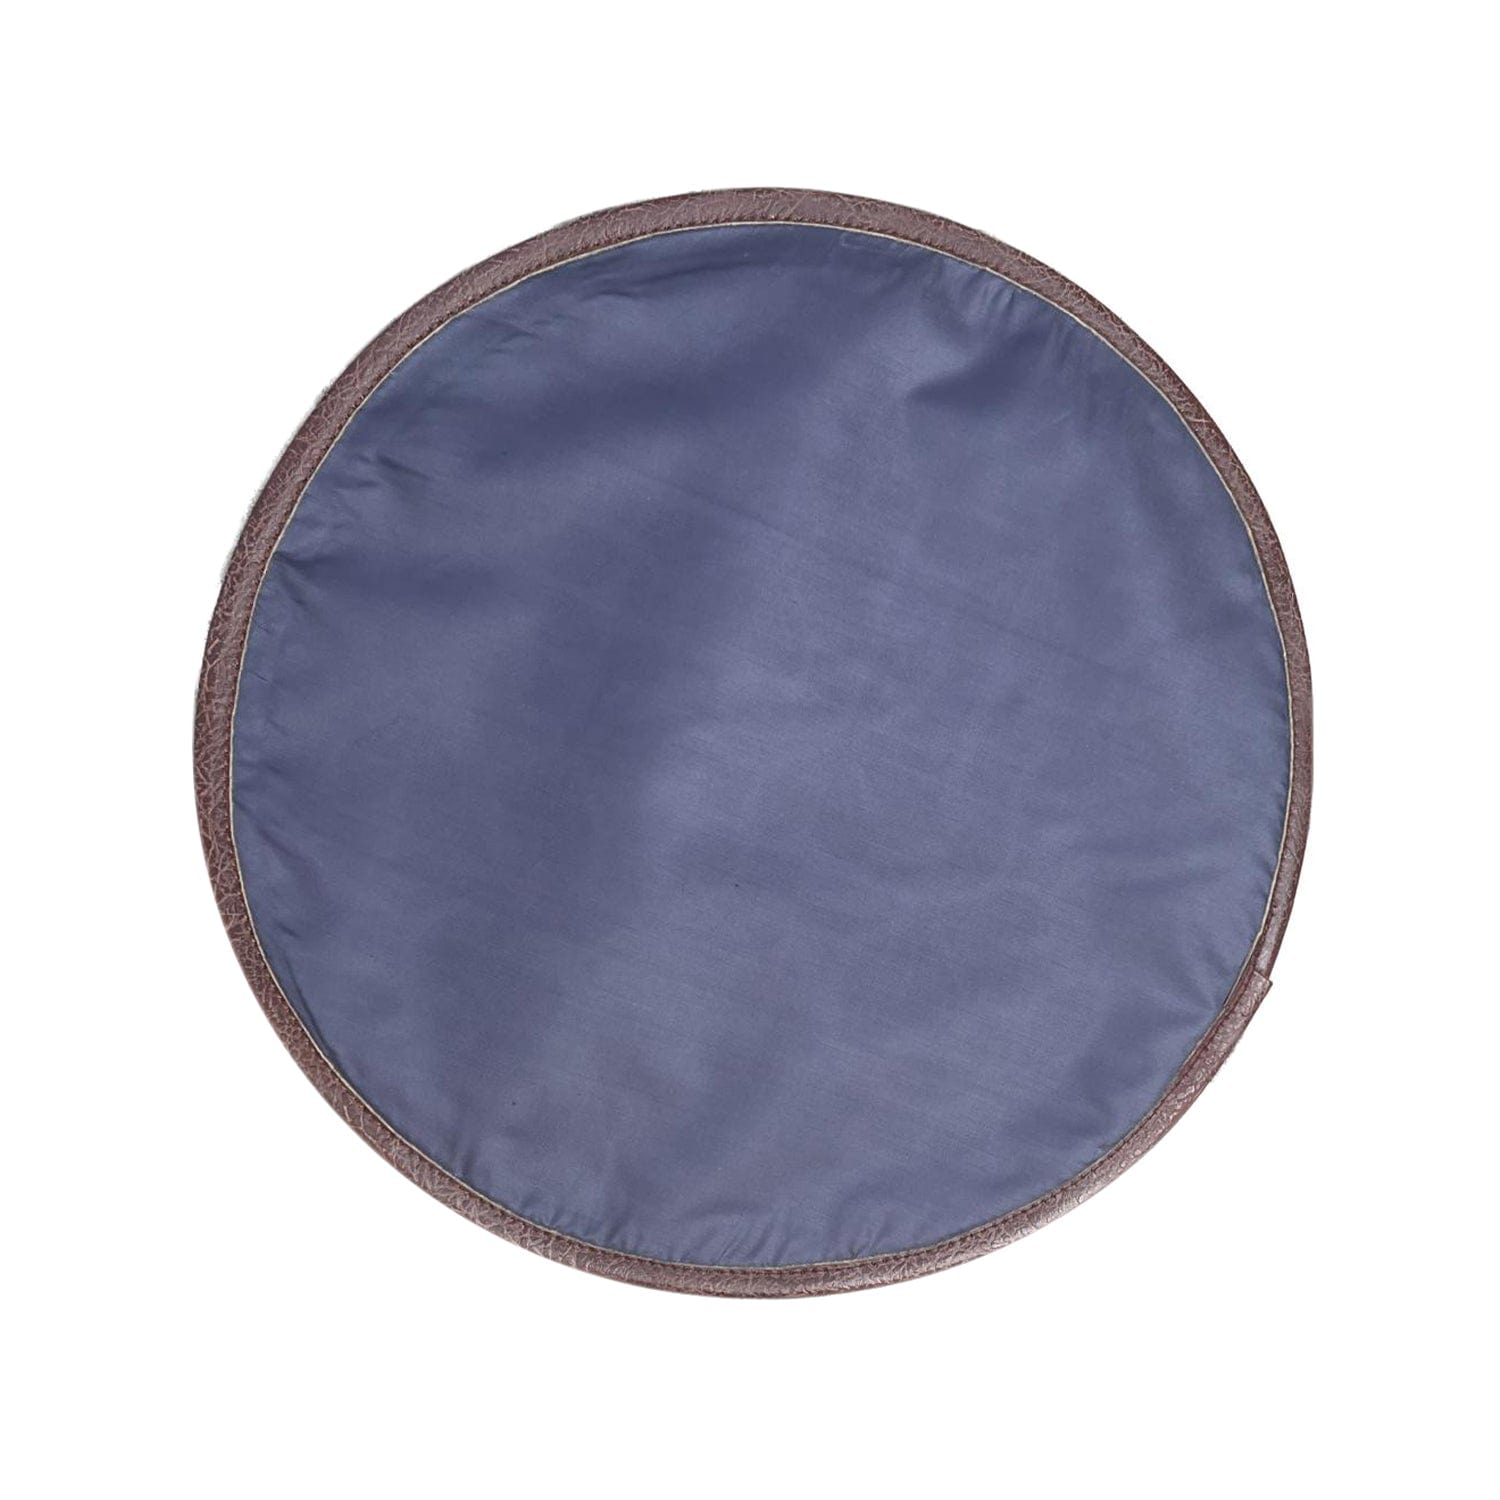 Mona-B Coaster Mona B Set of 4 Printed Coasters, 4.5 INCH Round, Best for Bed-Side Table/Center Table, Dining Table - PC-115